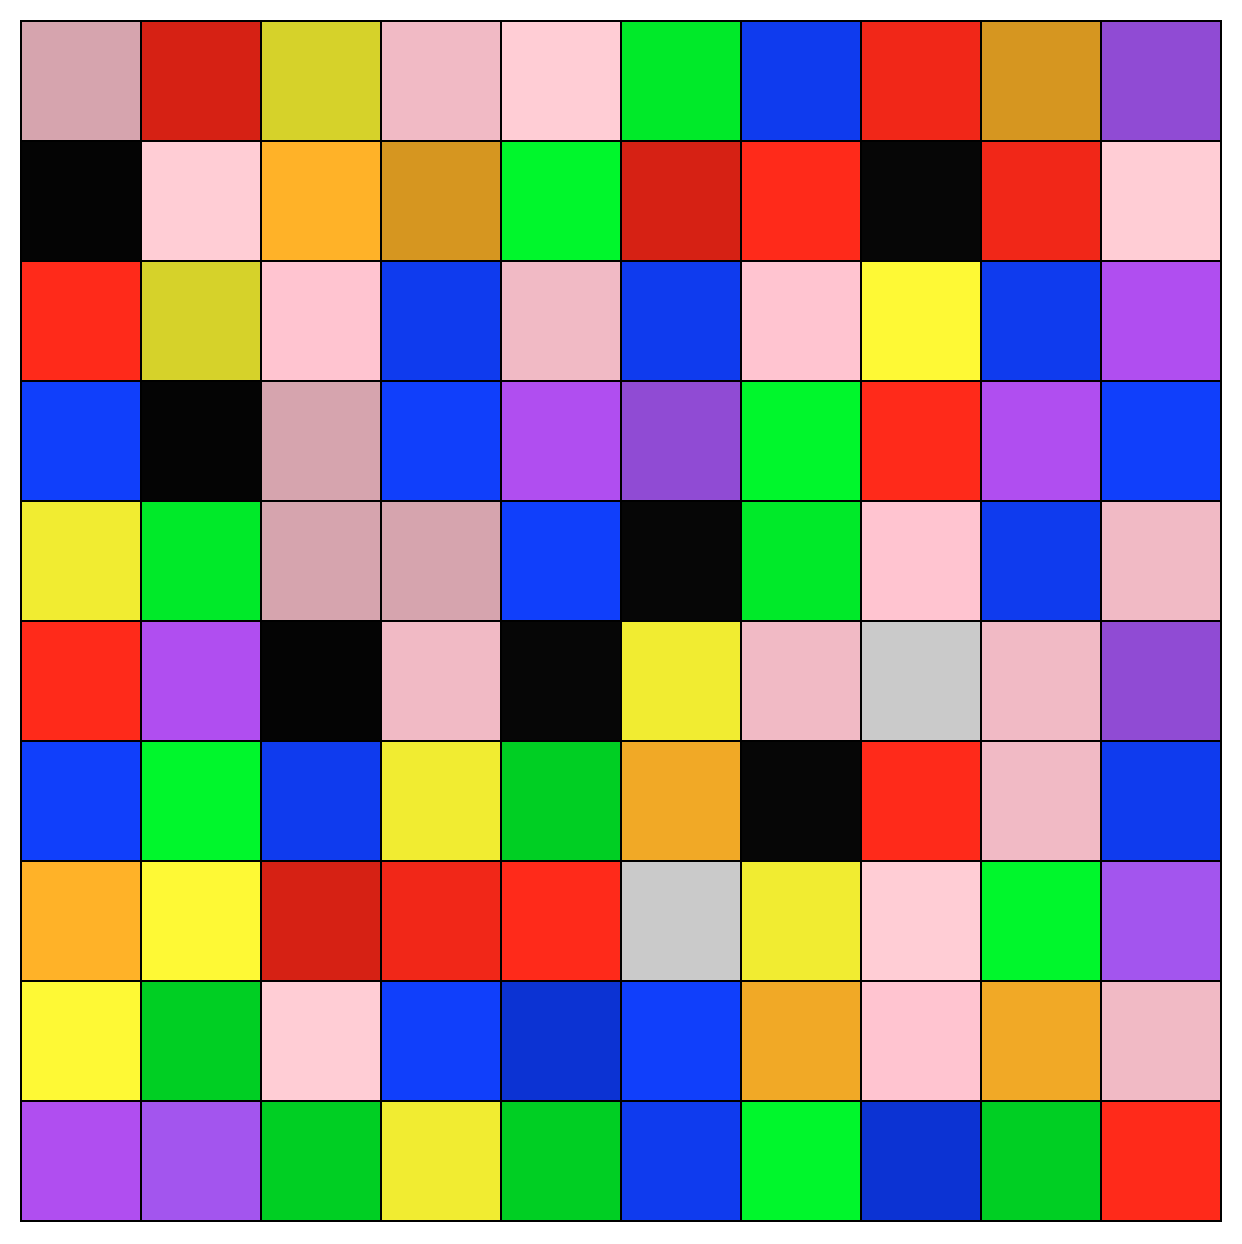 10x10 grid of colored squares